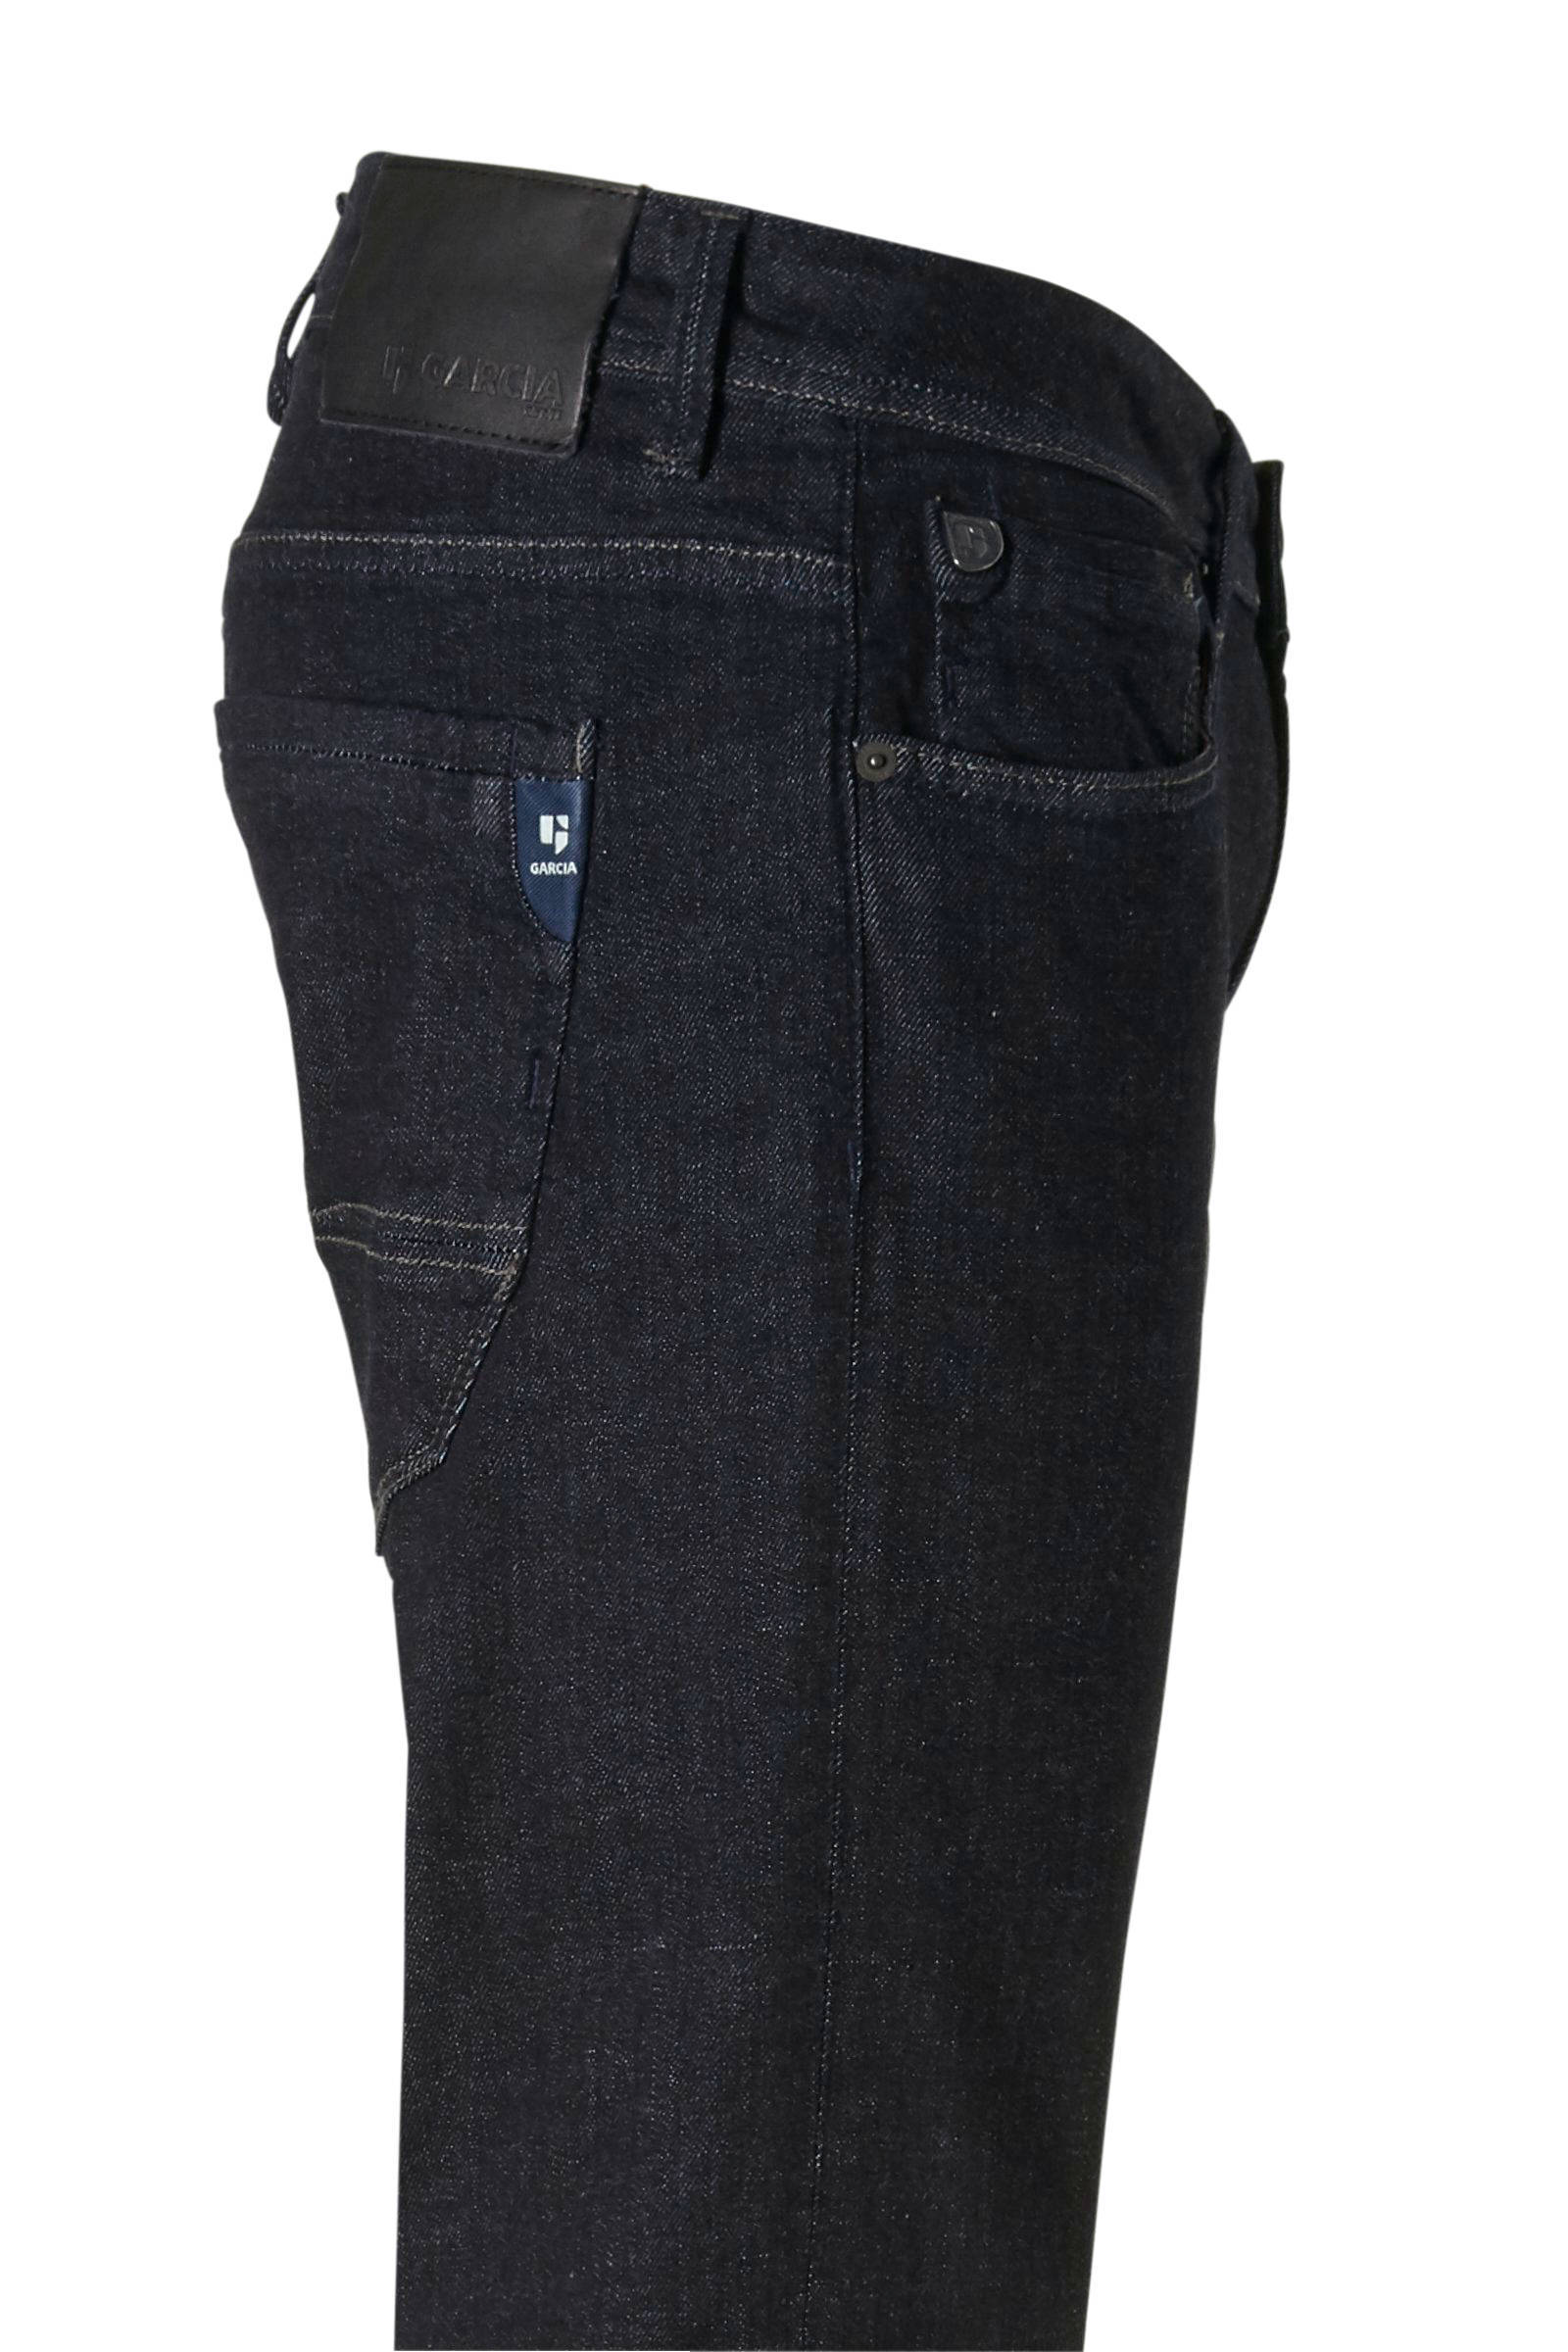 garcia jeans russo fit tapered